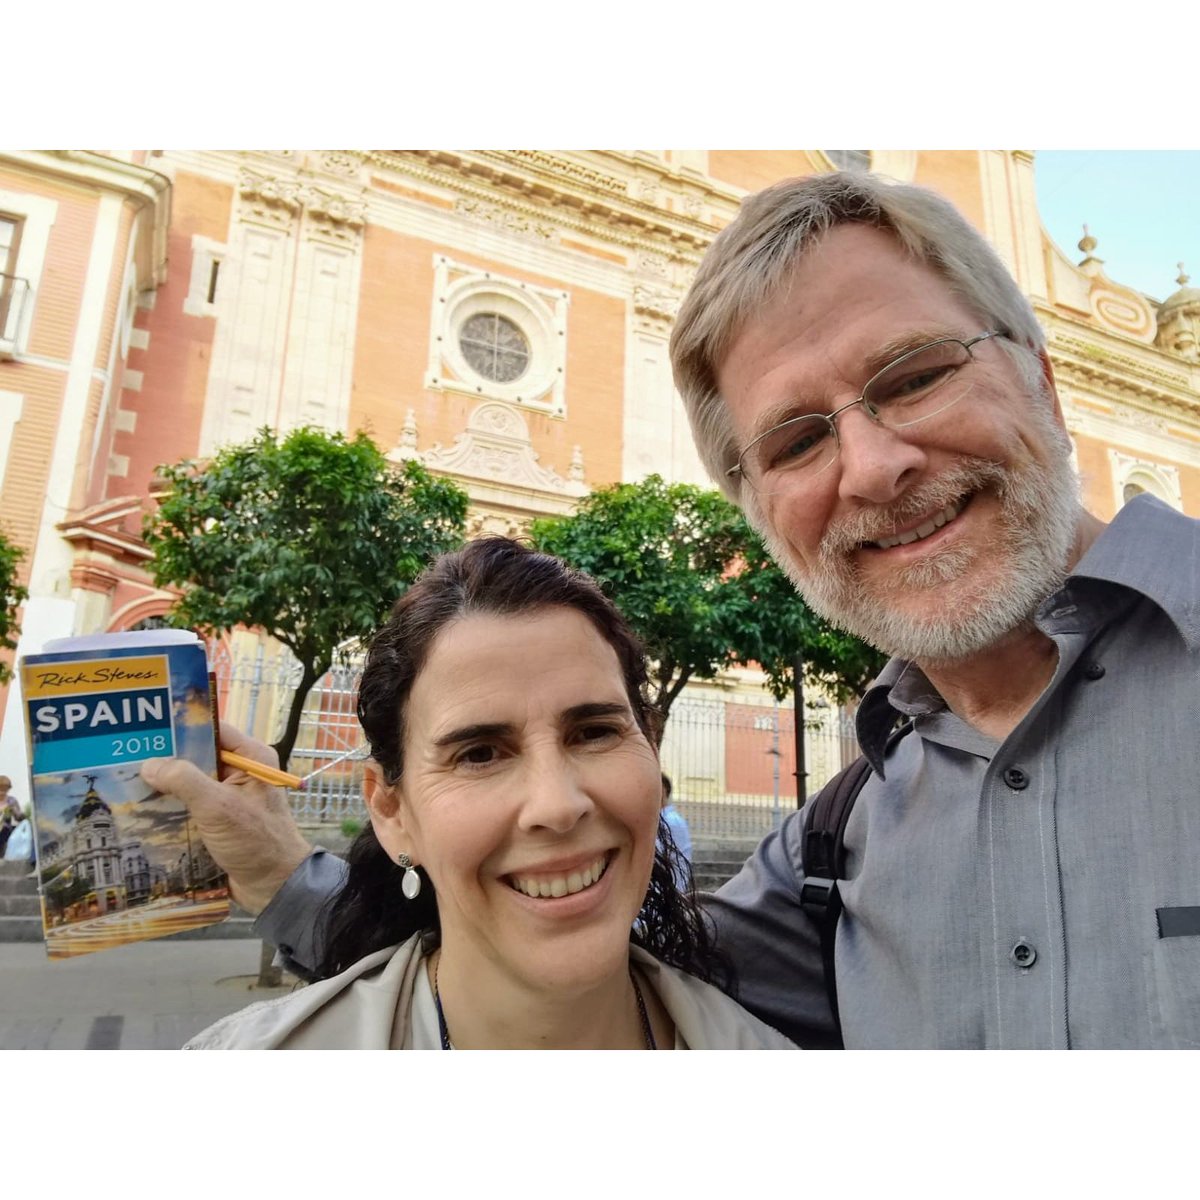 A working day with Rick Steves
#sevillawalkingtours #ricksteves #sevilla #spain #bestofspain #rickstevesbestofspain #andalucia #bestofeurope #rickstevesbestofeurope #rickstevestours